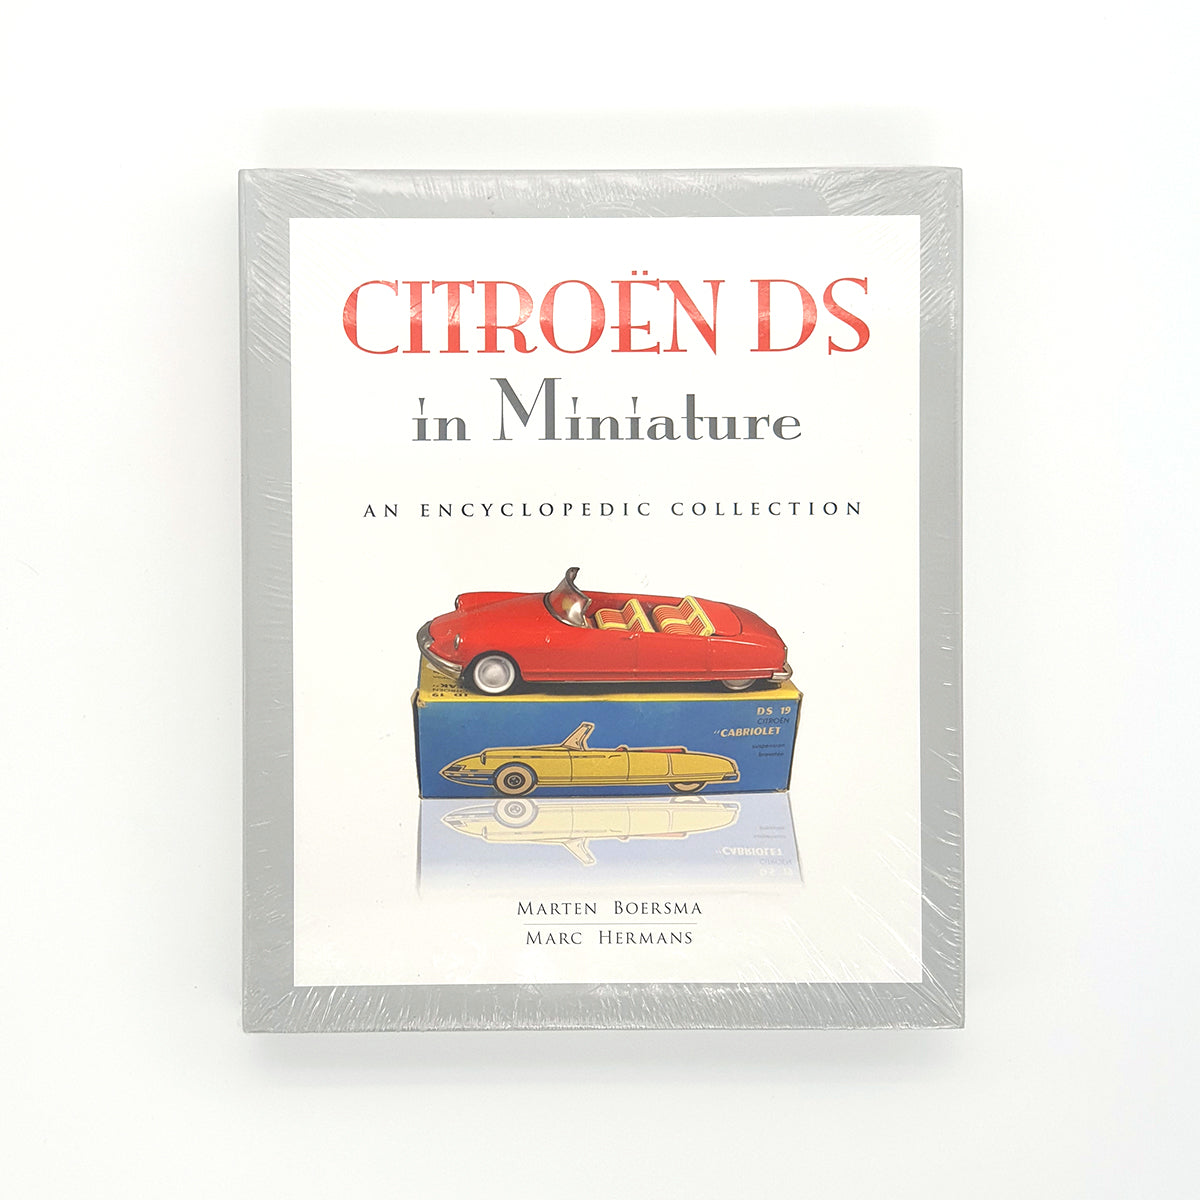 Citroën DS in Miniature: an encyclopedic collection